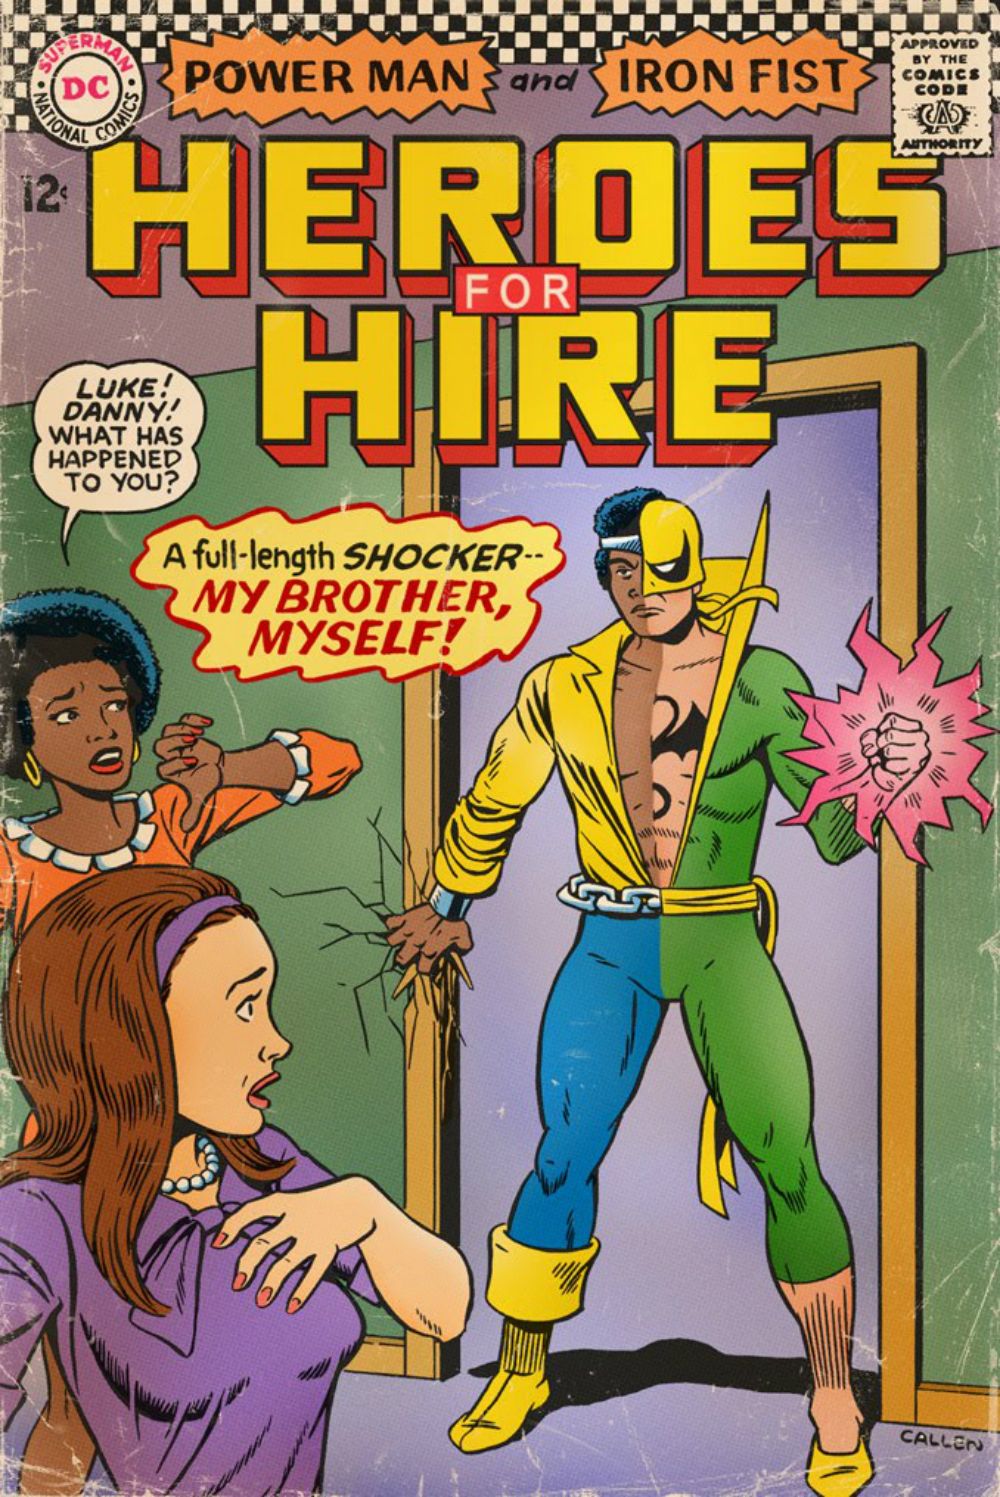 heroes-for-hire-power-man-iron-fist